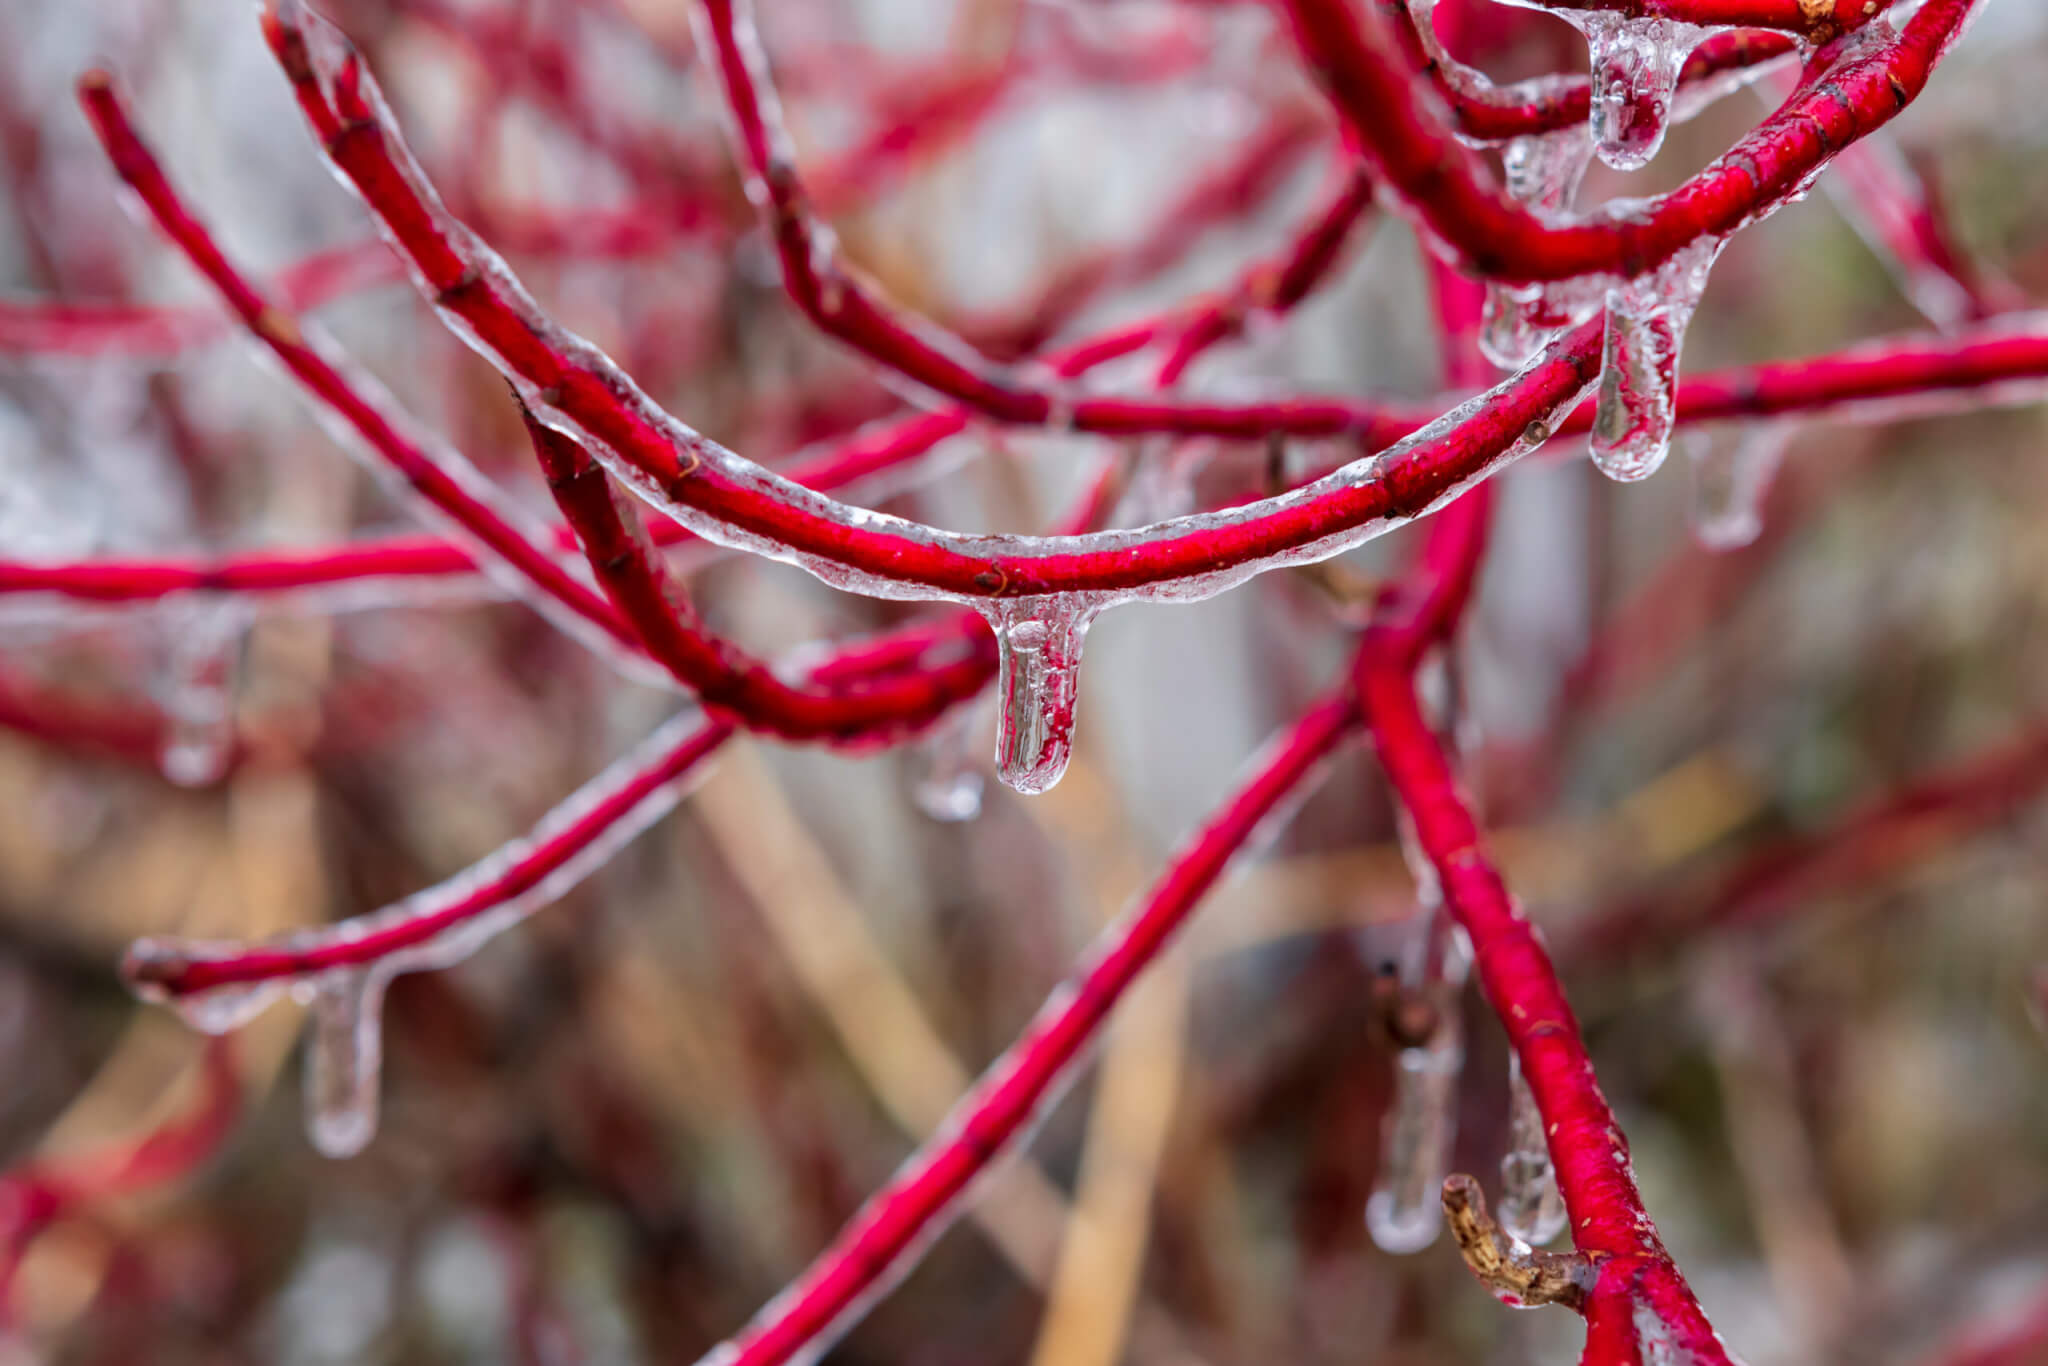 Ice covering red twig dogwood branches